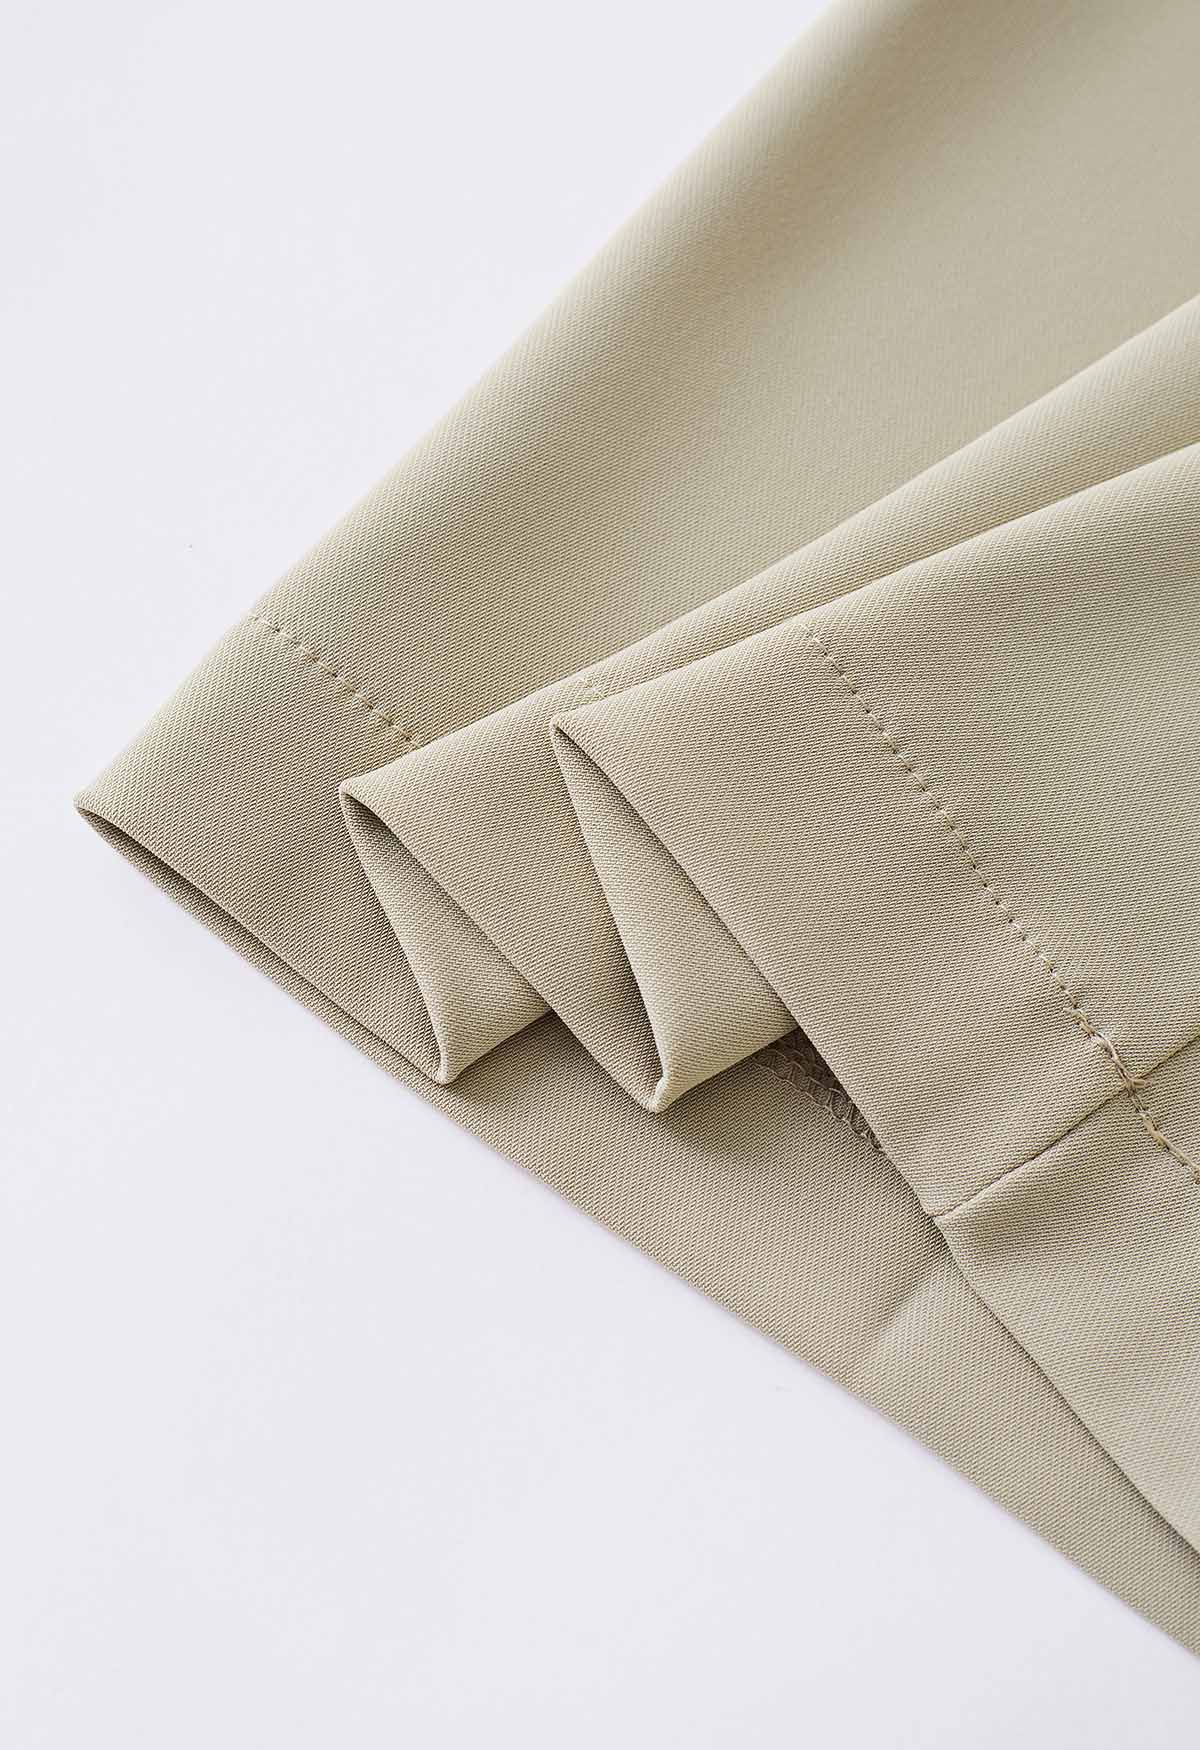 Smooth Satin Pull-On Pants in Light Tan